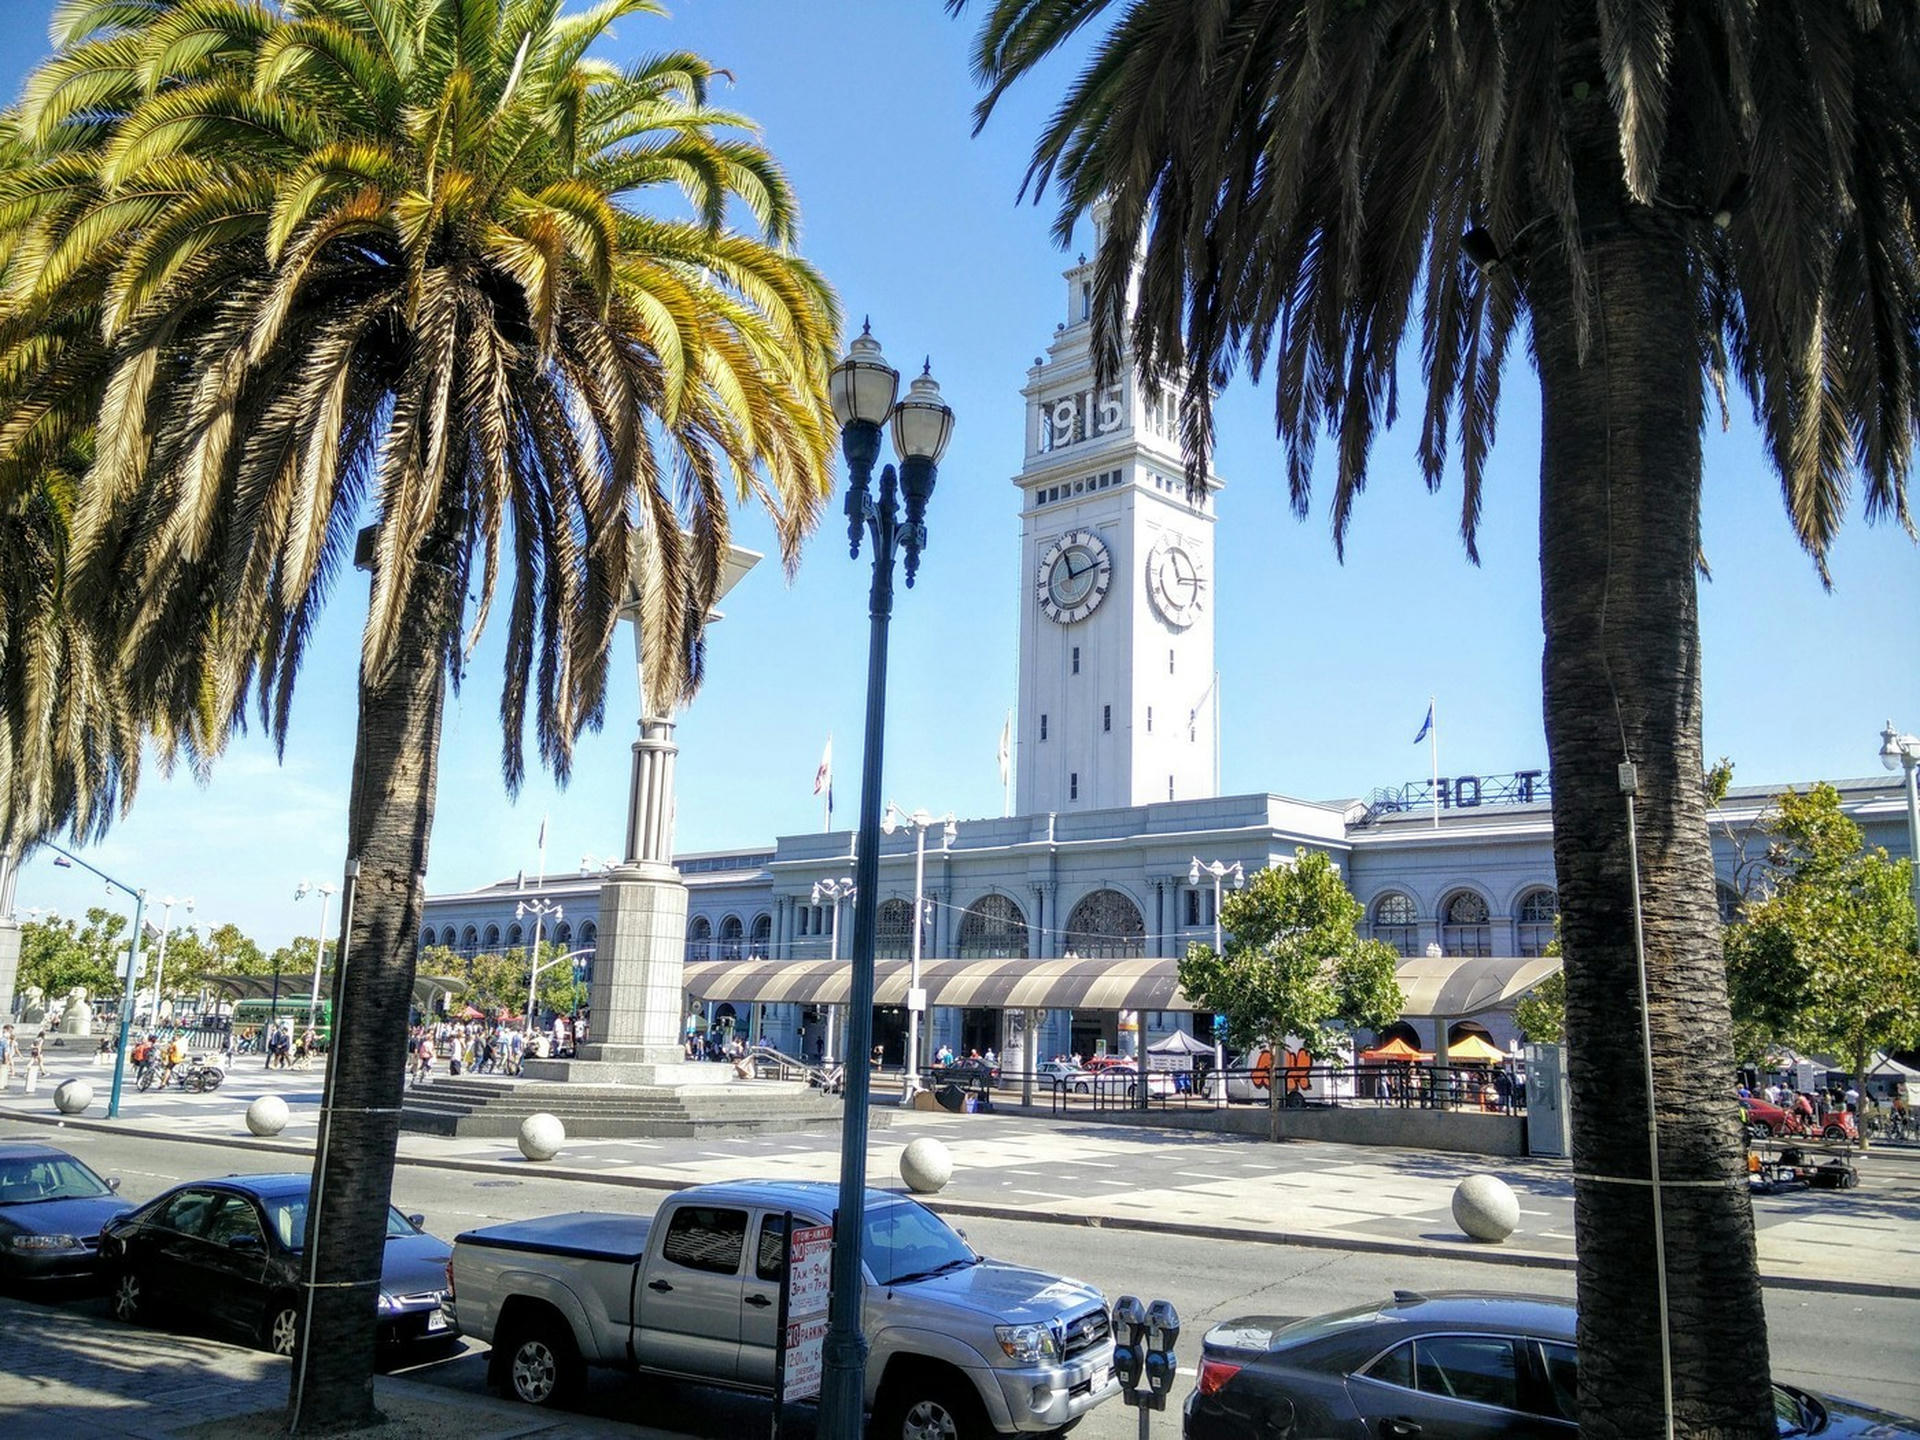 There was a market at the Ferry Building